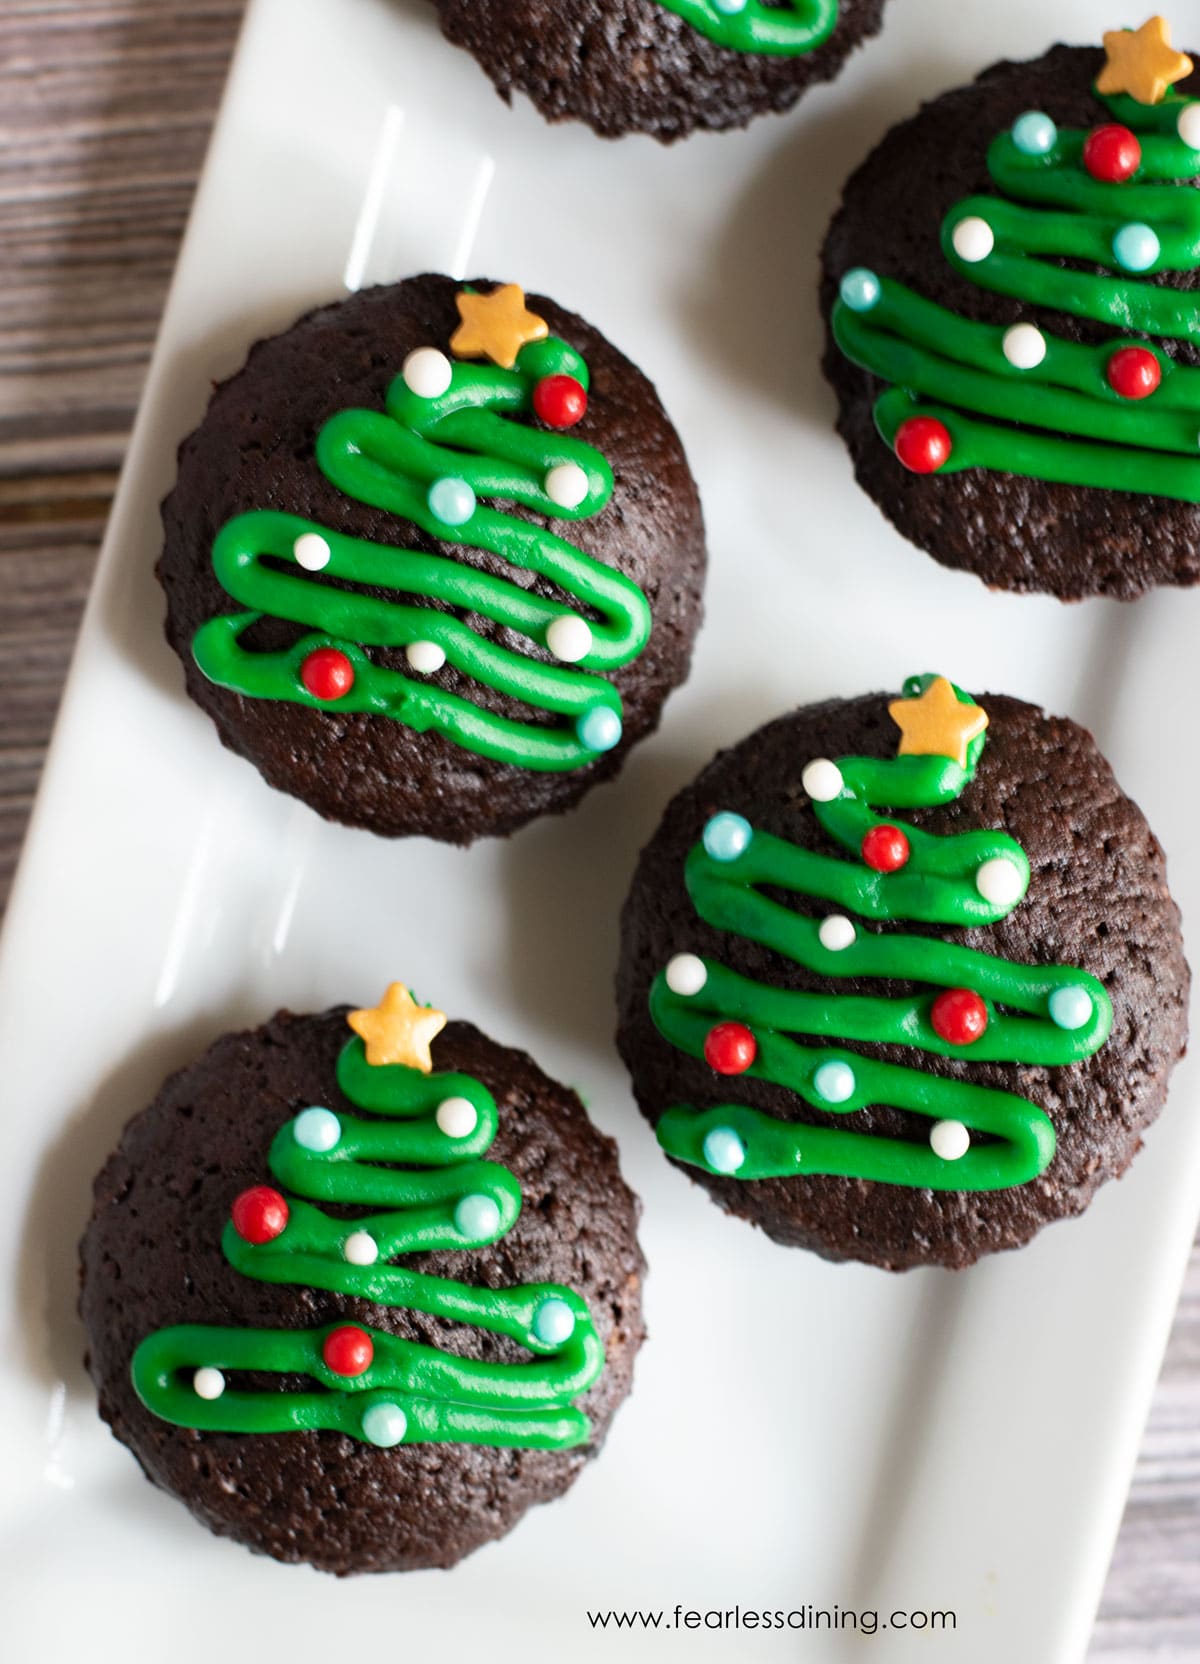 Gluten free brownie bites decorated with icing Christmas trees on a platter.